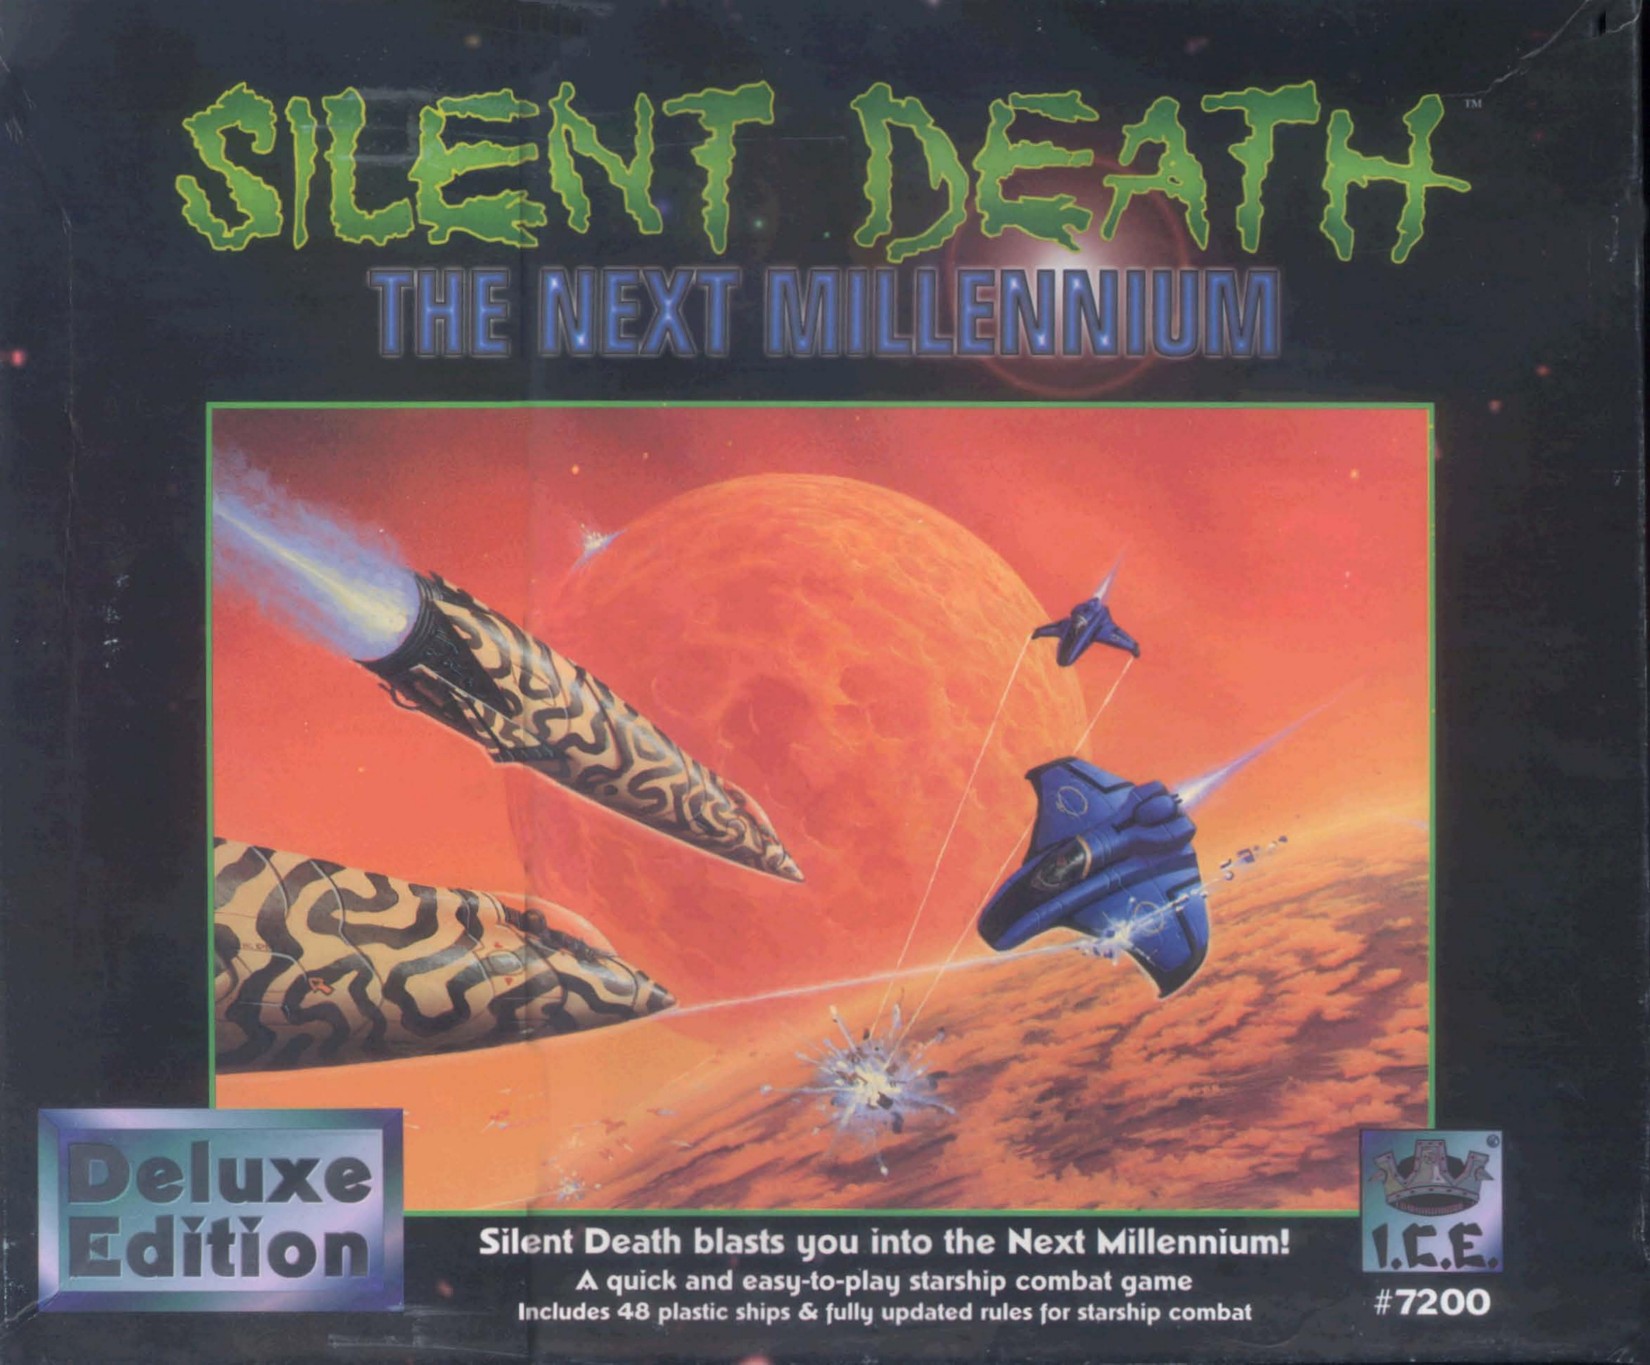 ICE7200 Silent Death Boxed Set